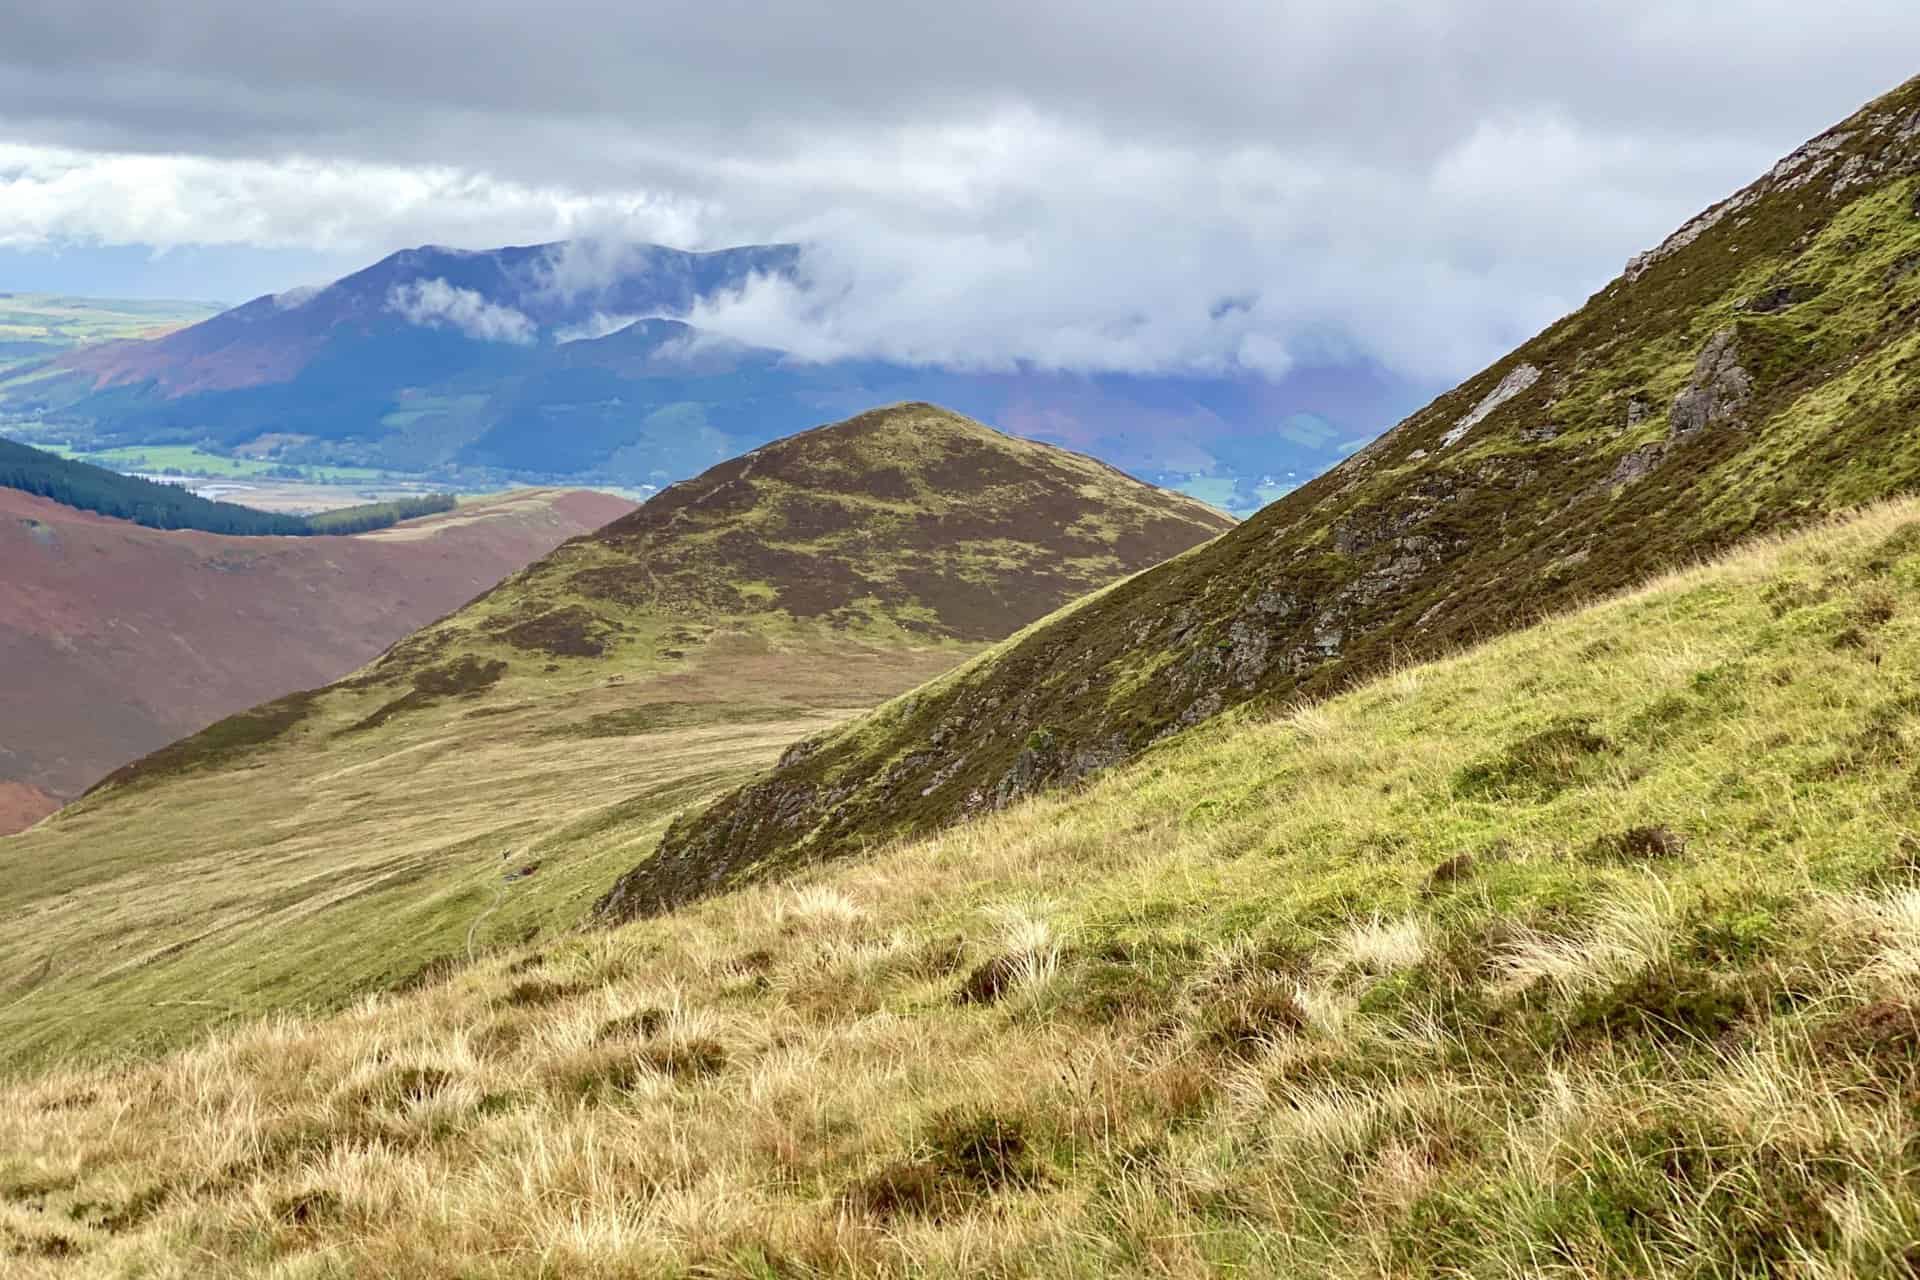 The view of Outerside from the col between Sail and Causey Pike. In the distance is the Skiddaw range of mountains. Skiddaw, Carl Side and Little Man are cloud-covered, but Dodd, Long Side and Ullock Pike can be seen.